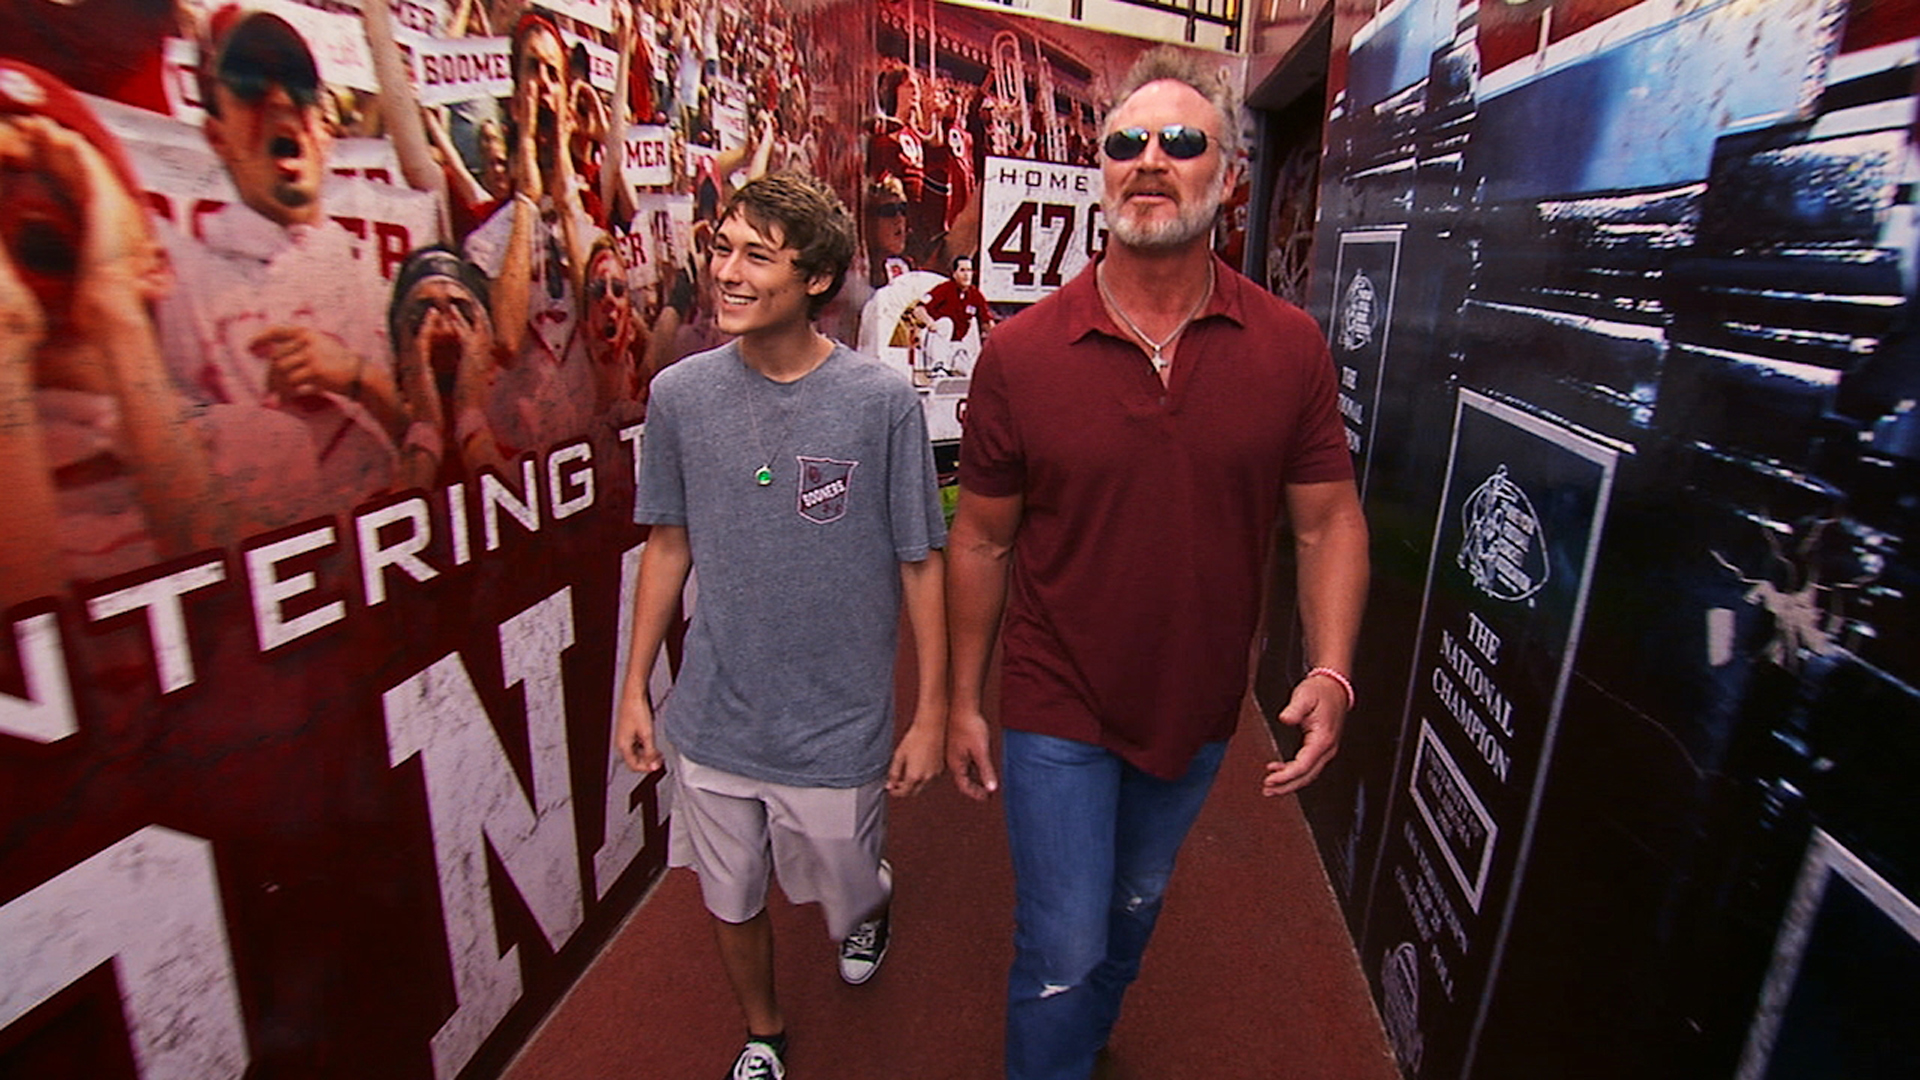 30 for 30 film Brian and The Boz debuts tonight - ESPN Front Row